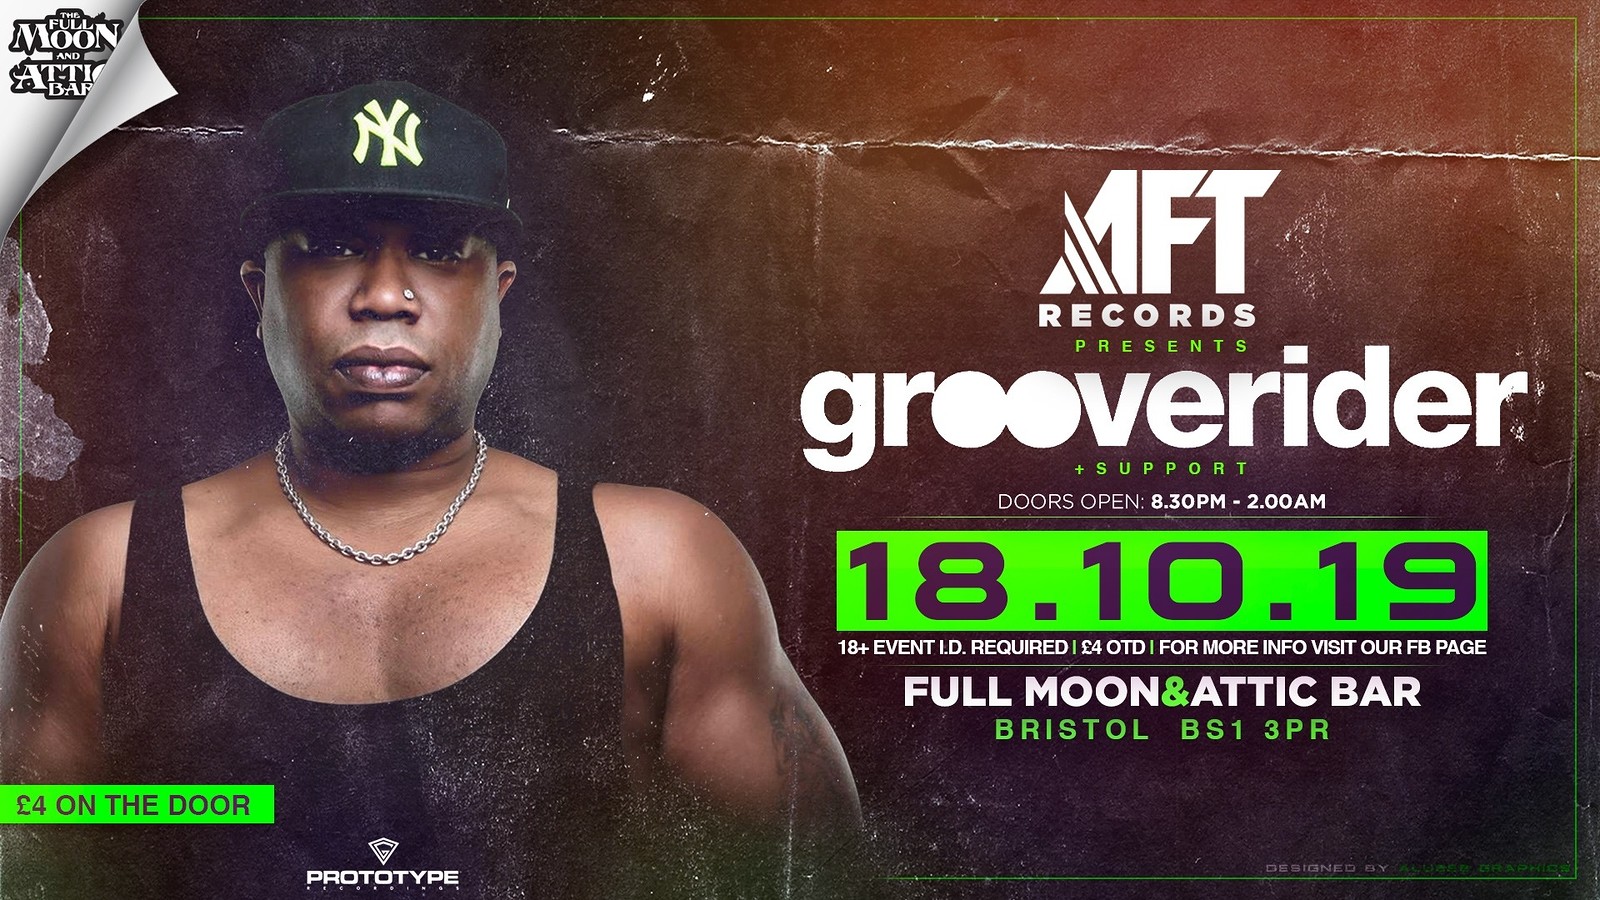 AFT Records #31: Grooverider at The Attic Bar